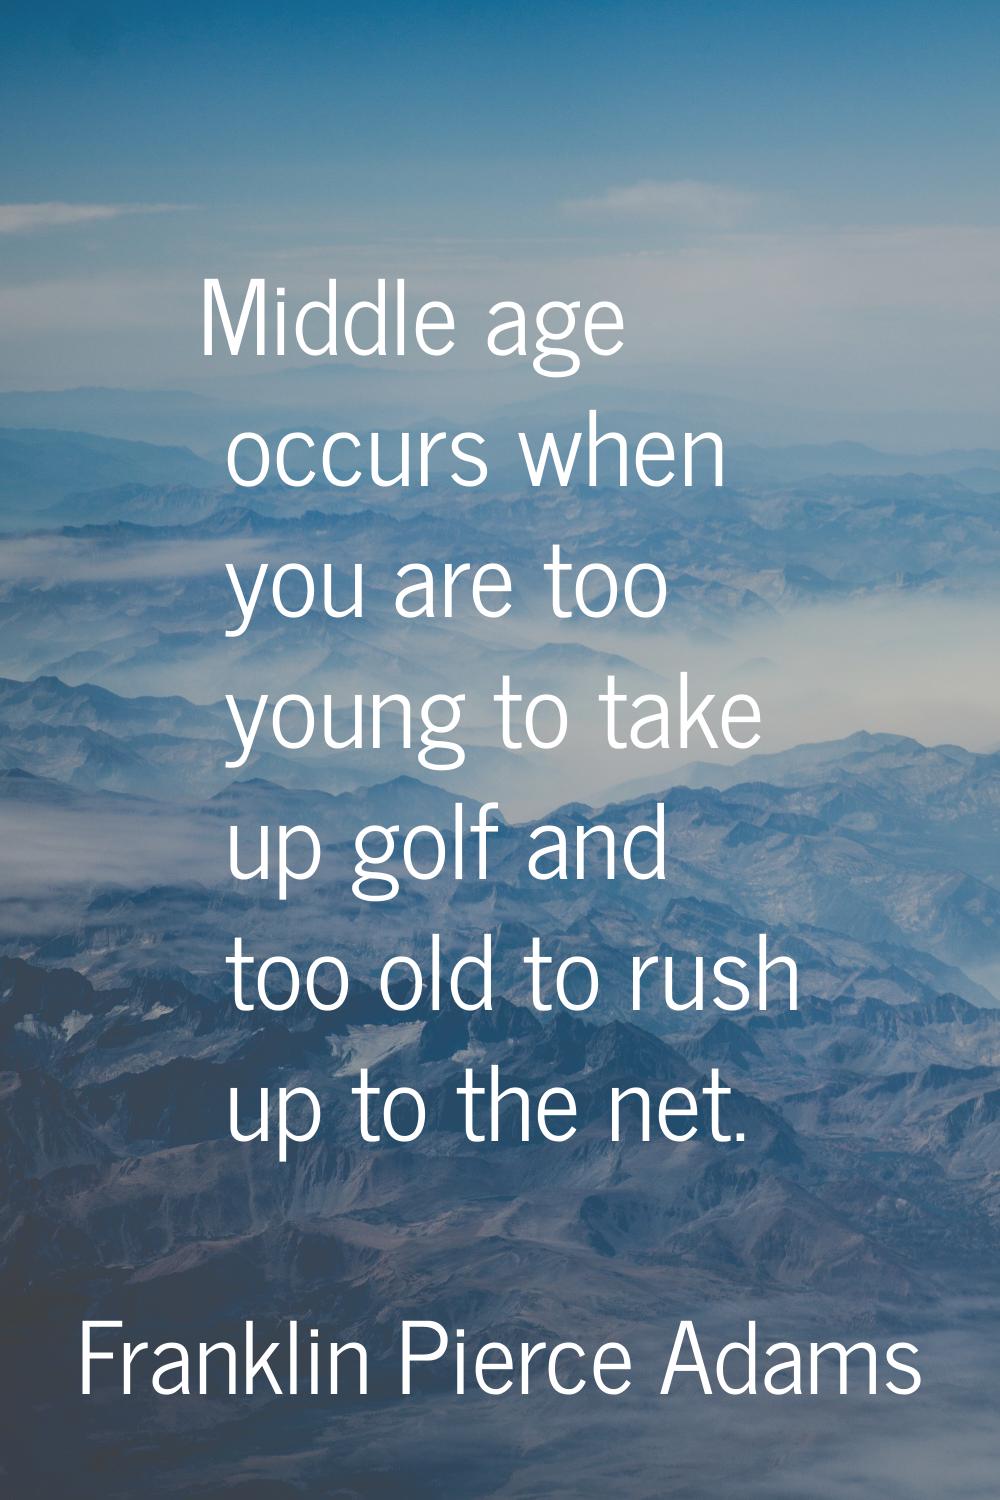 Middle age occurs when you are too young to take up golf and too old to rush up to the net.